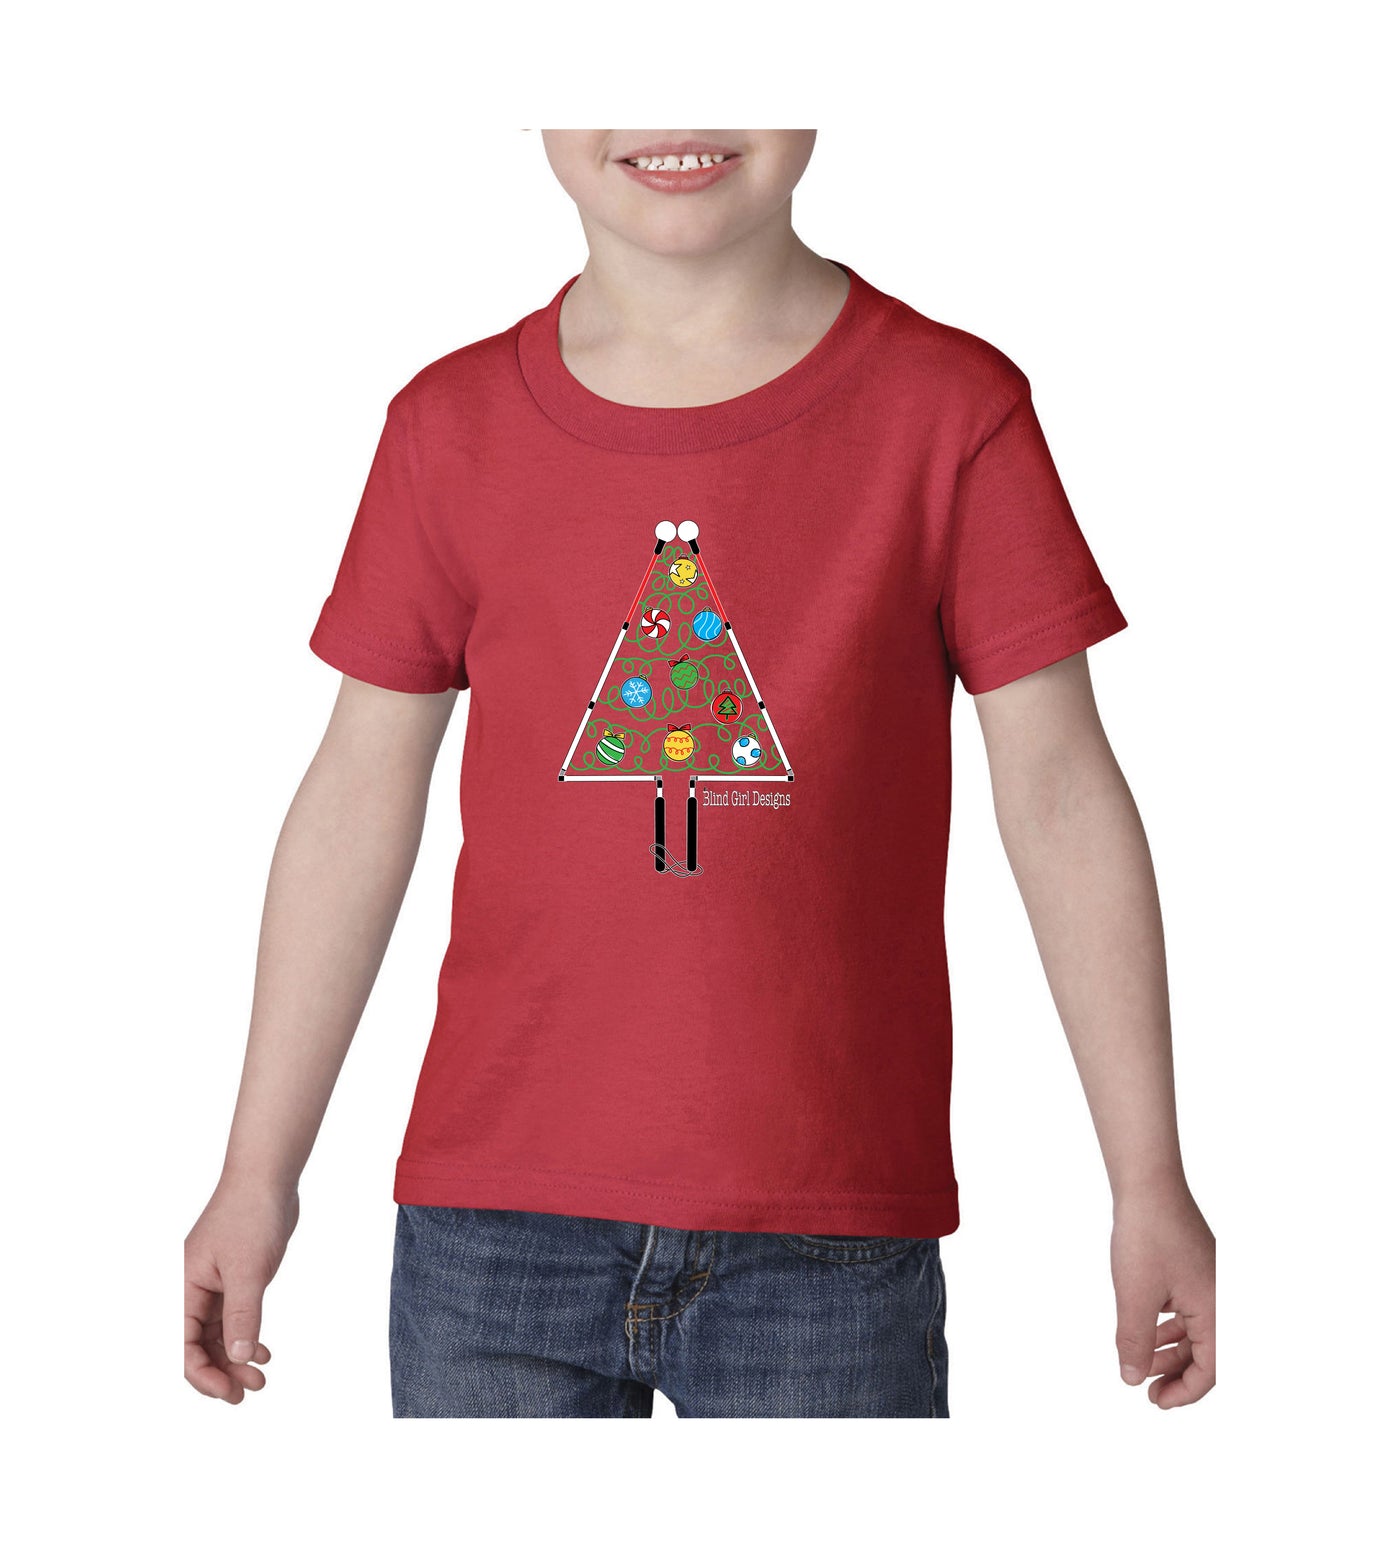 Kids and Toddlers Christmas Tree White Cane T-Shirt - Red